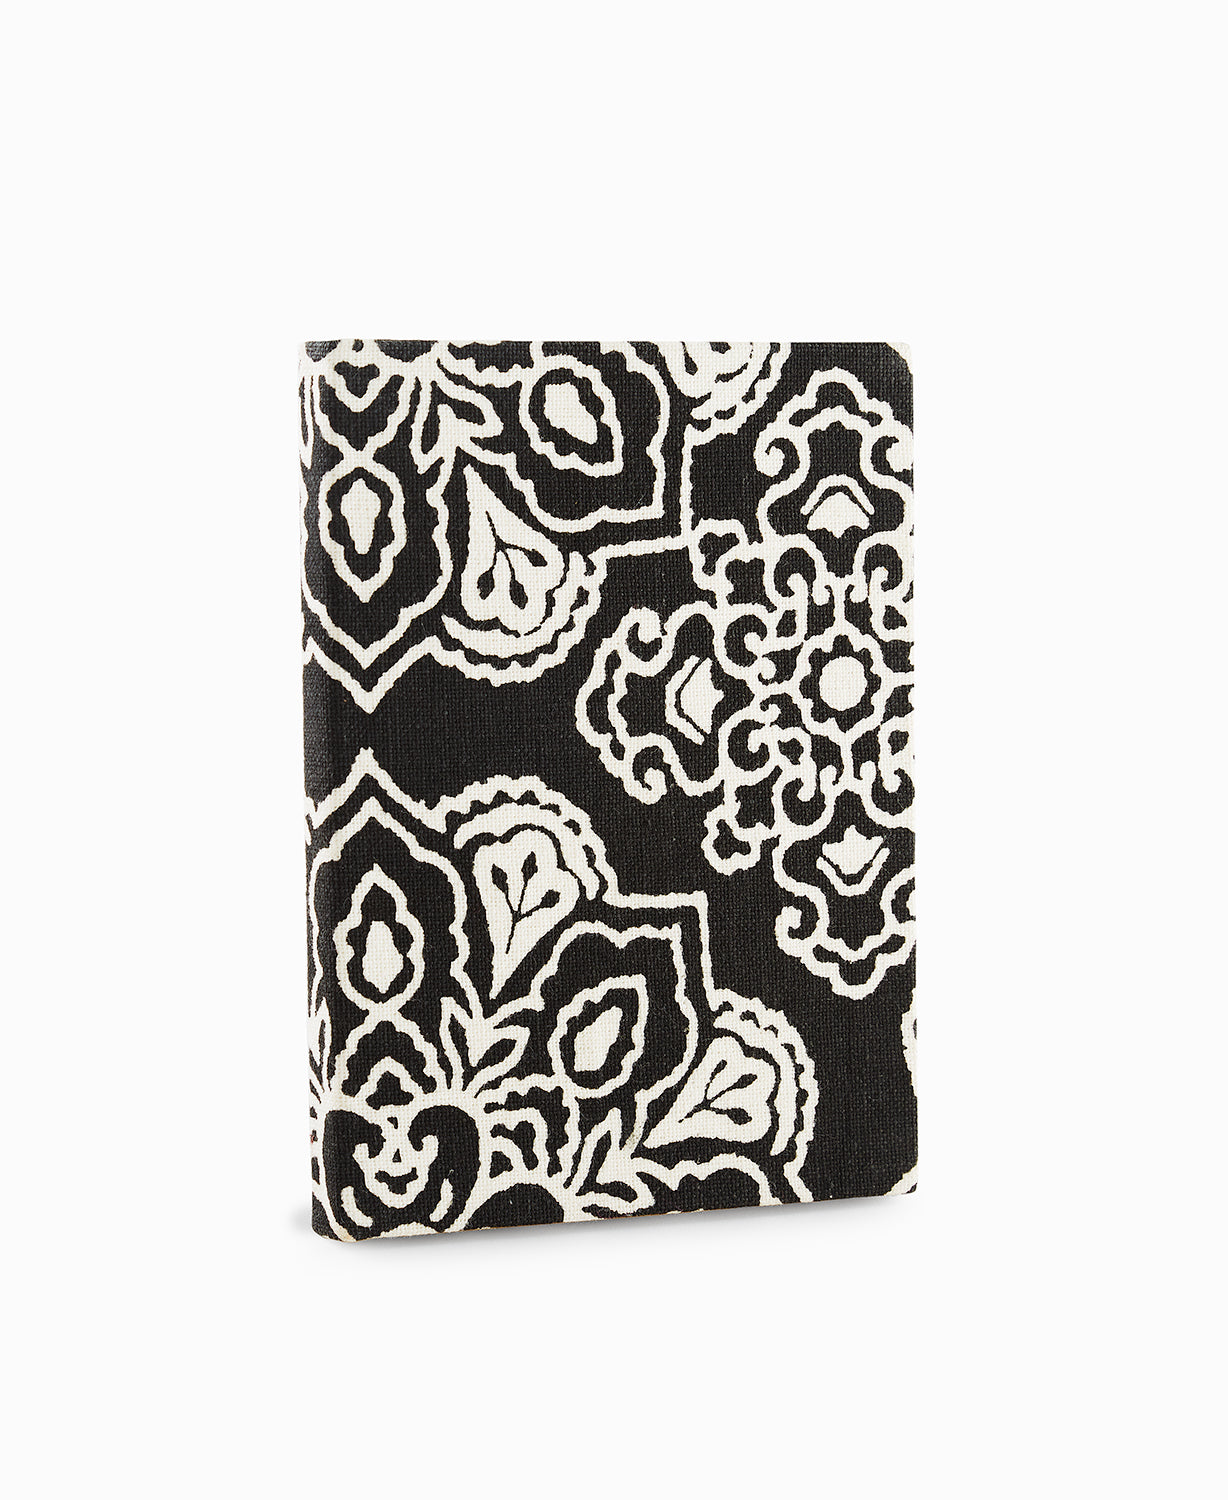 Black Color with Flower Design Diary Cloth with Diary -Upcycled Diary!